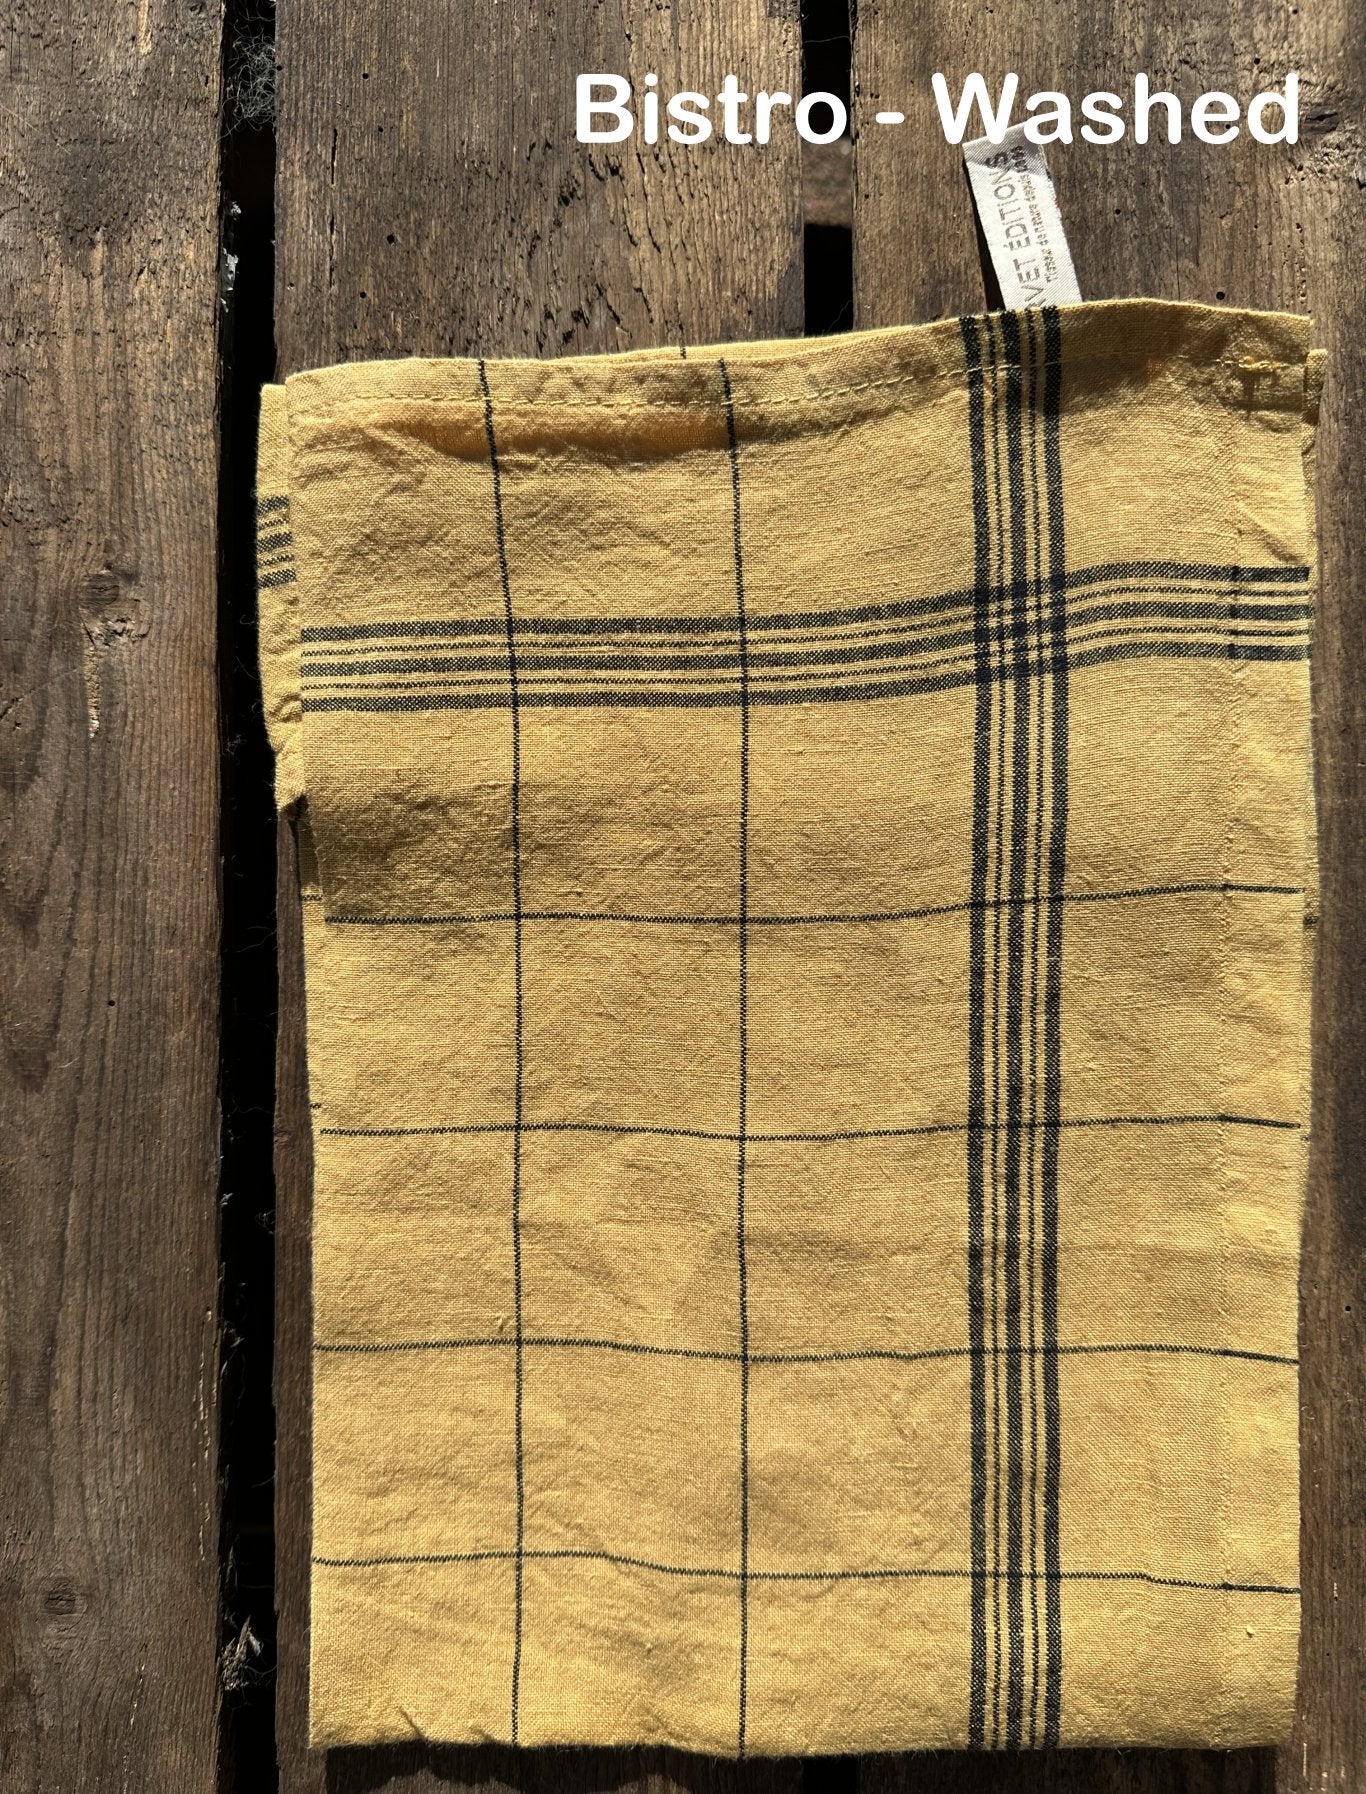 Charvet Editions "Bistro" (Onion), Natural woven linen tea towel. Made in France.